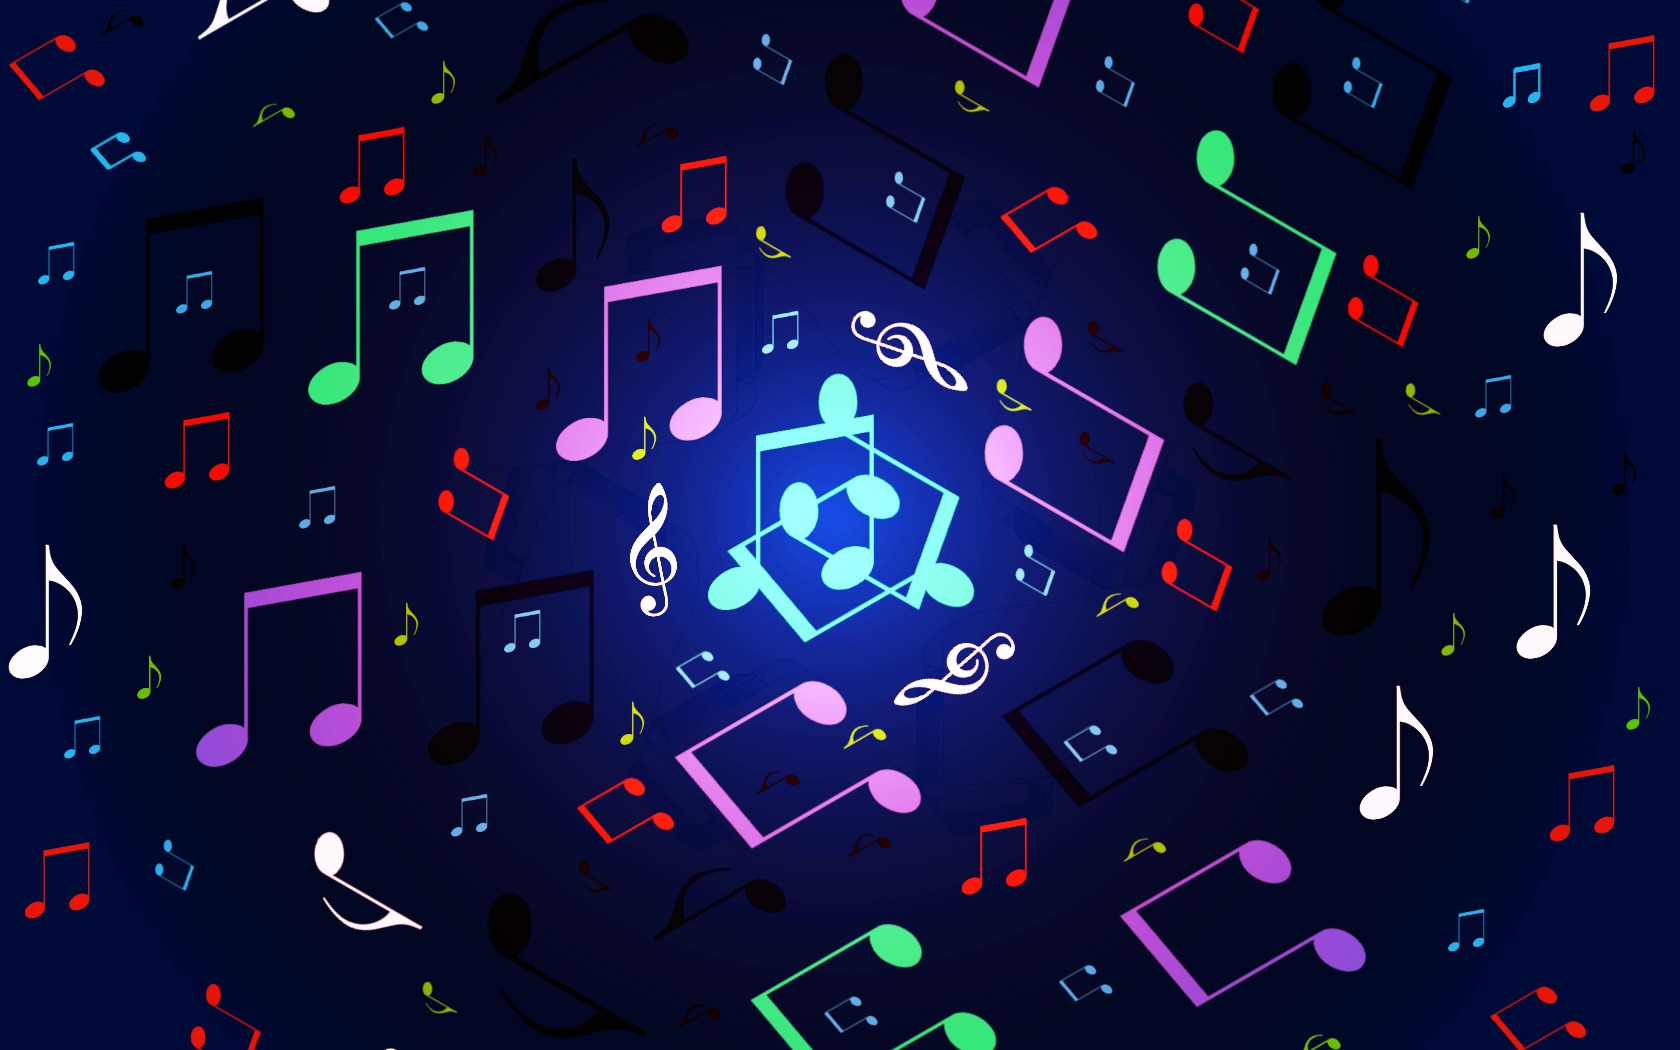 Image Cool Desktop Background With Music Notes Pc Android